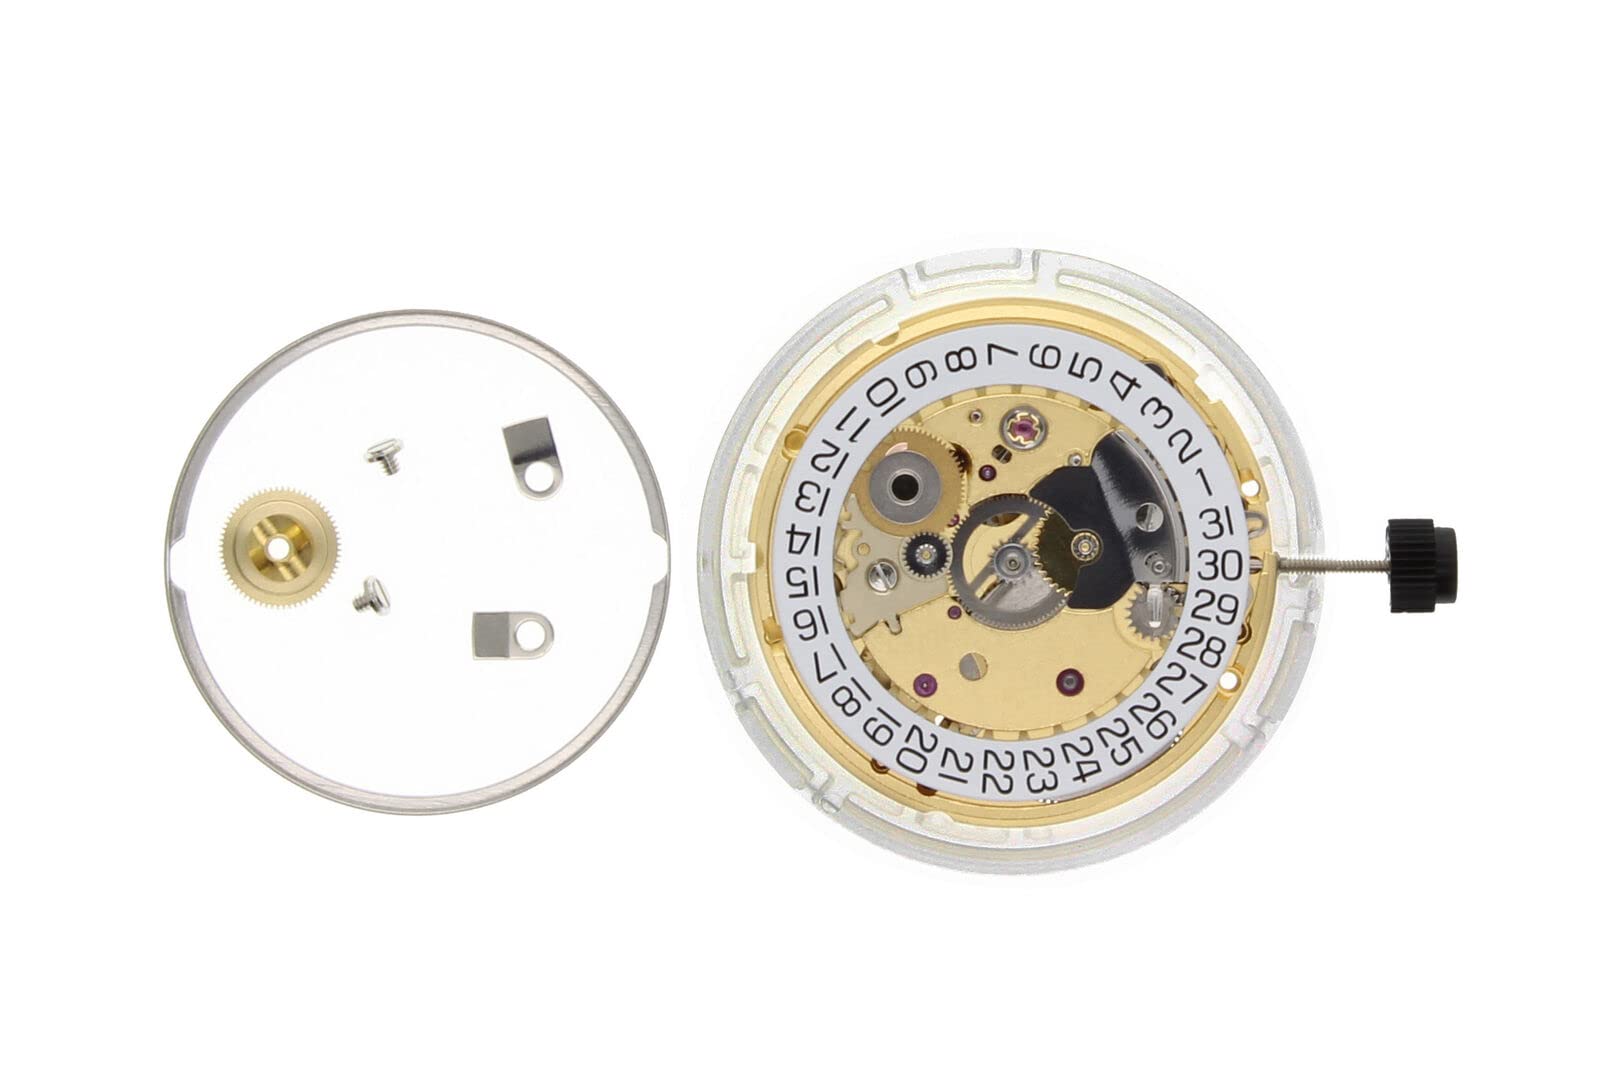 Ewatchparts Genuine Compatible with ETA 2824-2 Automatic Watch Movement 25 Jewel Date @3 Gold New Swiss Made